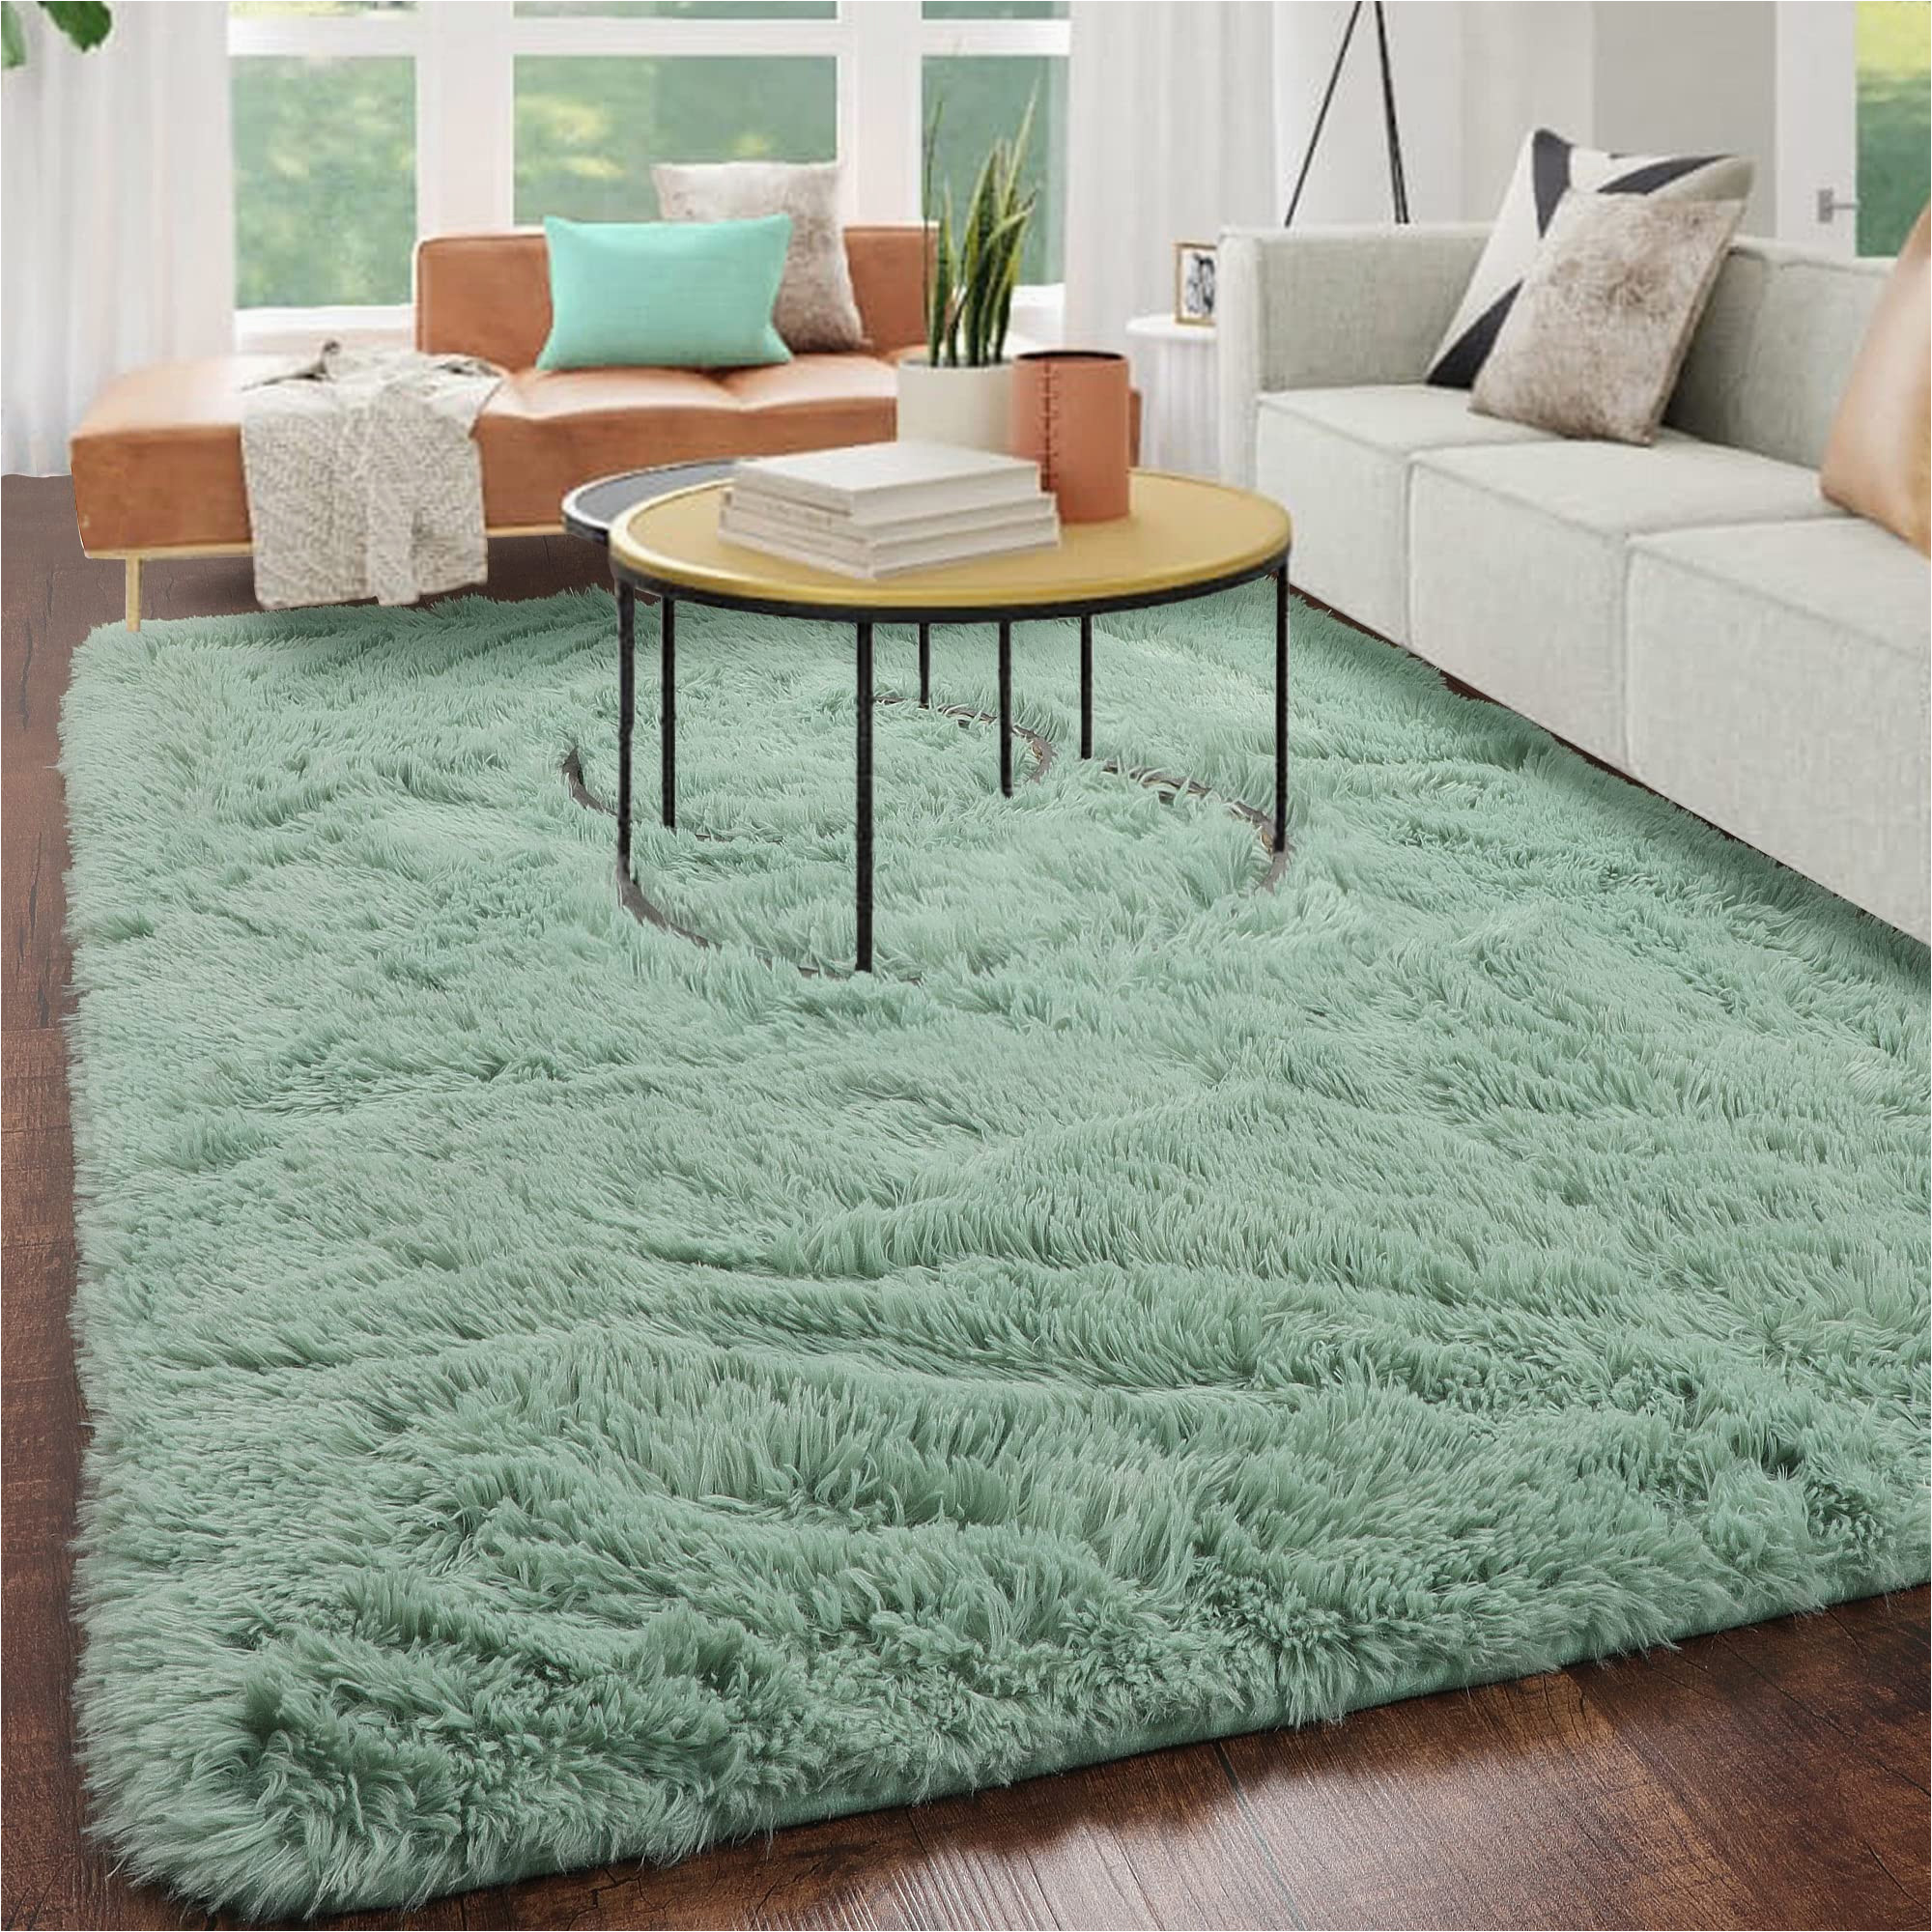 4 X 6 Green area Rugs Kicmor Fluffy Rugs for Bedroom,4×6 Rug,soft Shag area Rugs for Living Room,shaggy Throw Rugs for Kids Playroom,home Office Decor,baby Nursery …